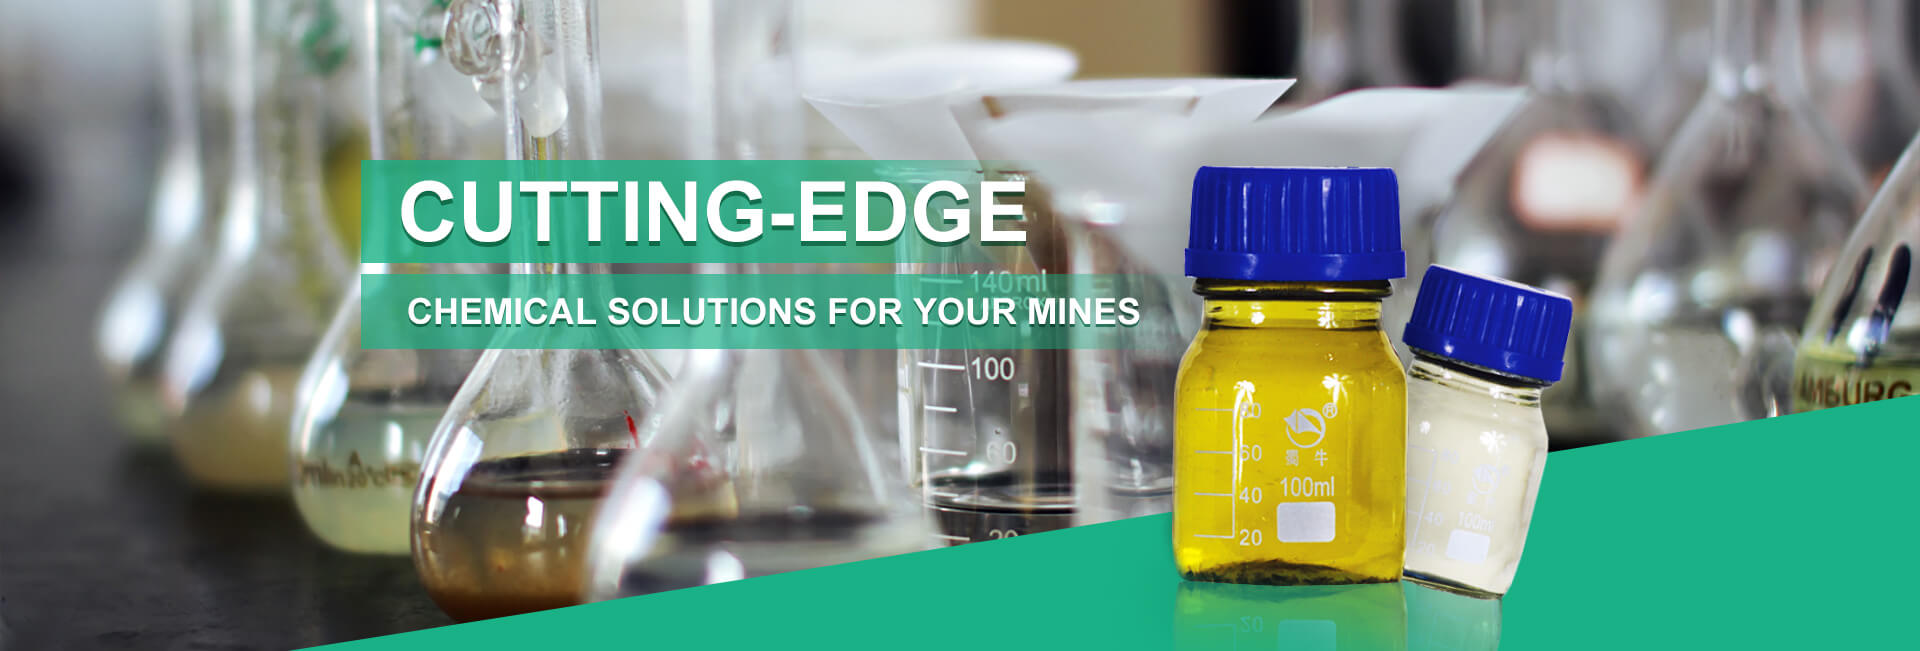 Cutting-edge Chemical Solutions for Your Mines